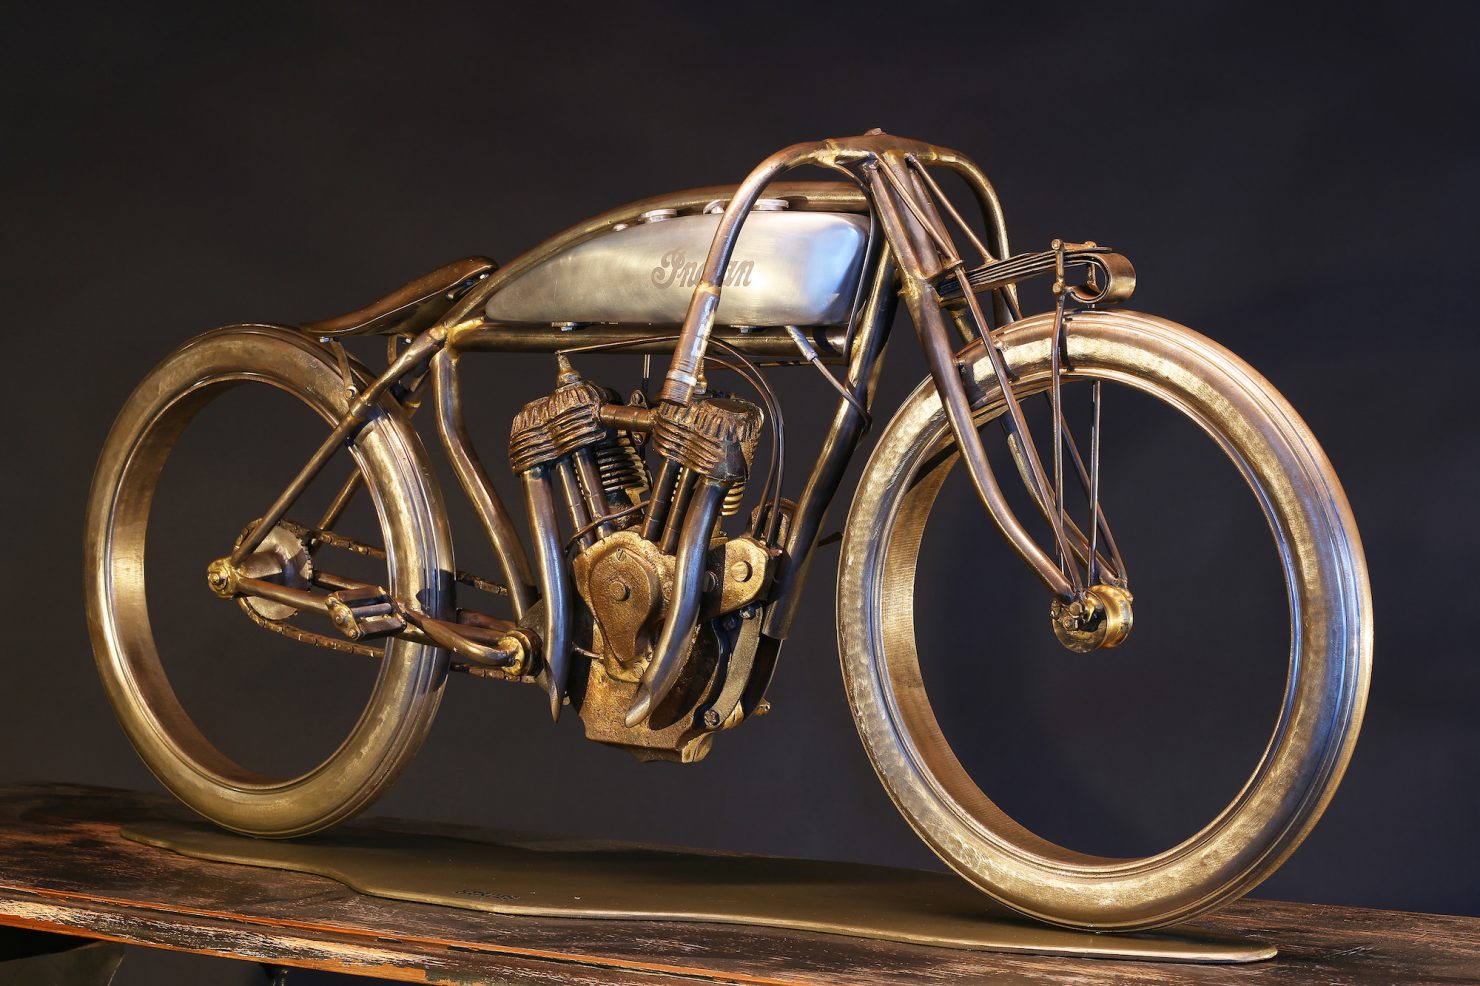 INDIAN BOARD TRACK MOTORCYCLE SCULPTURES